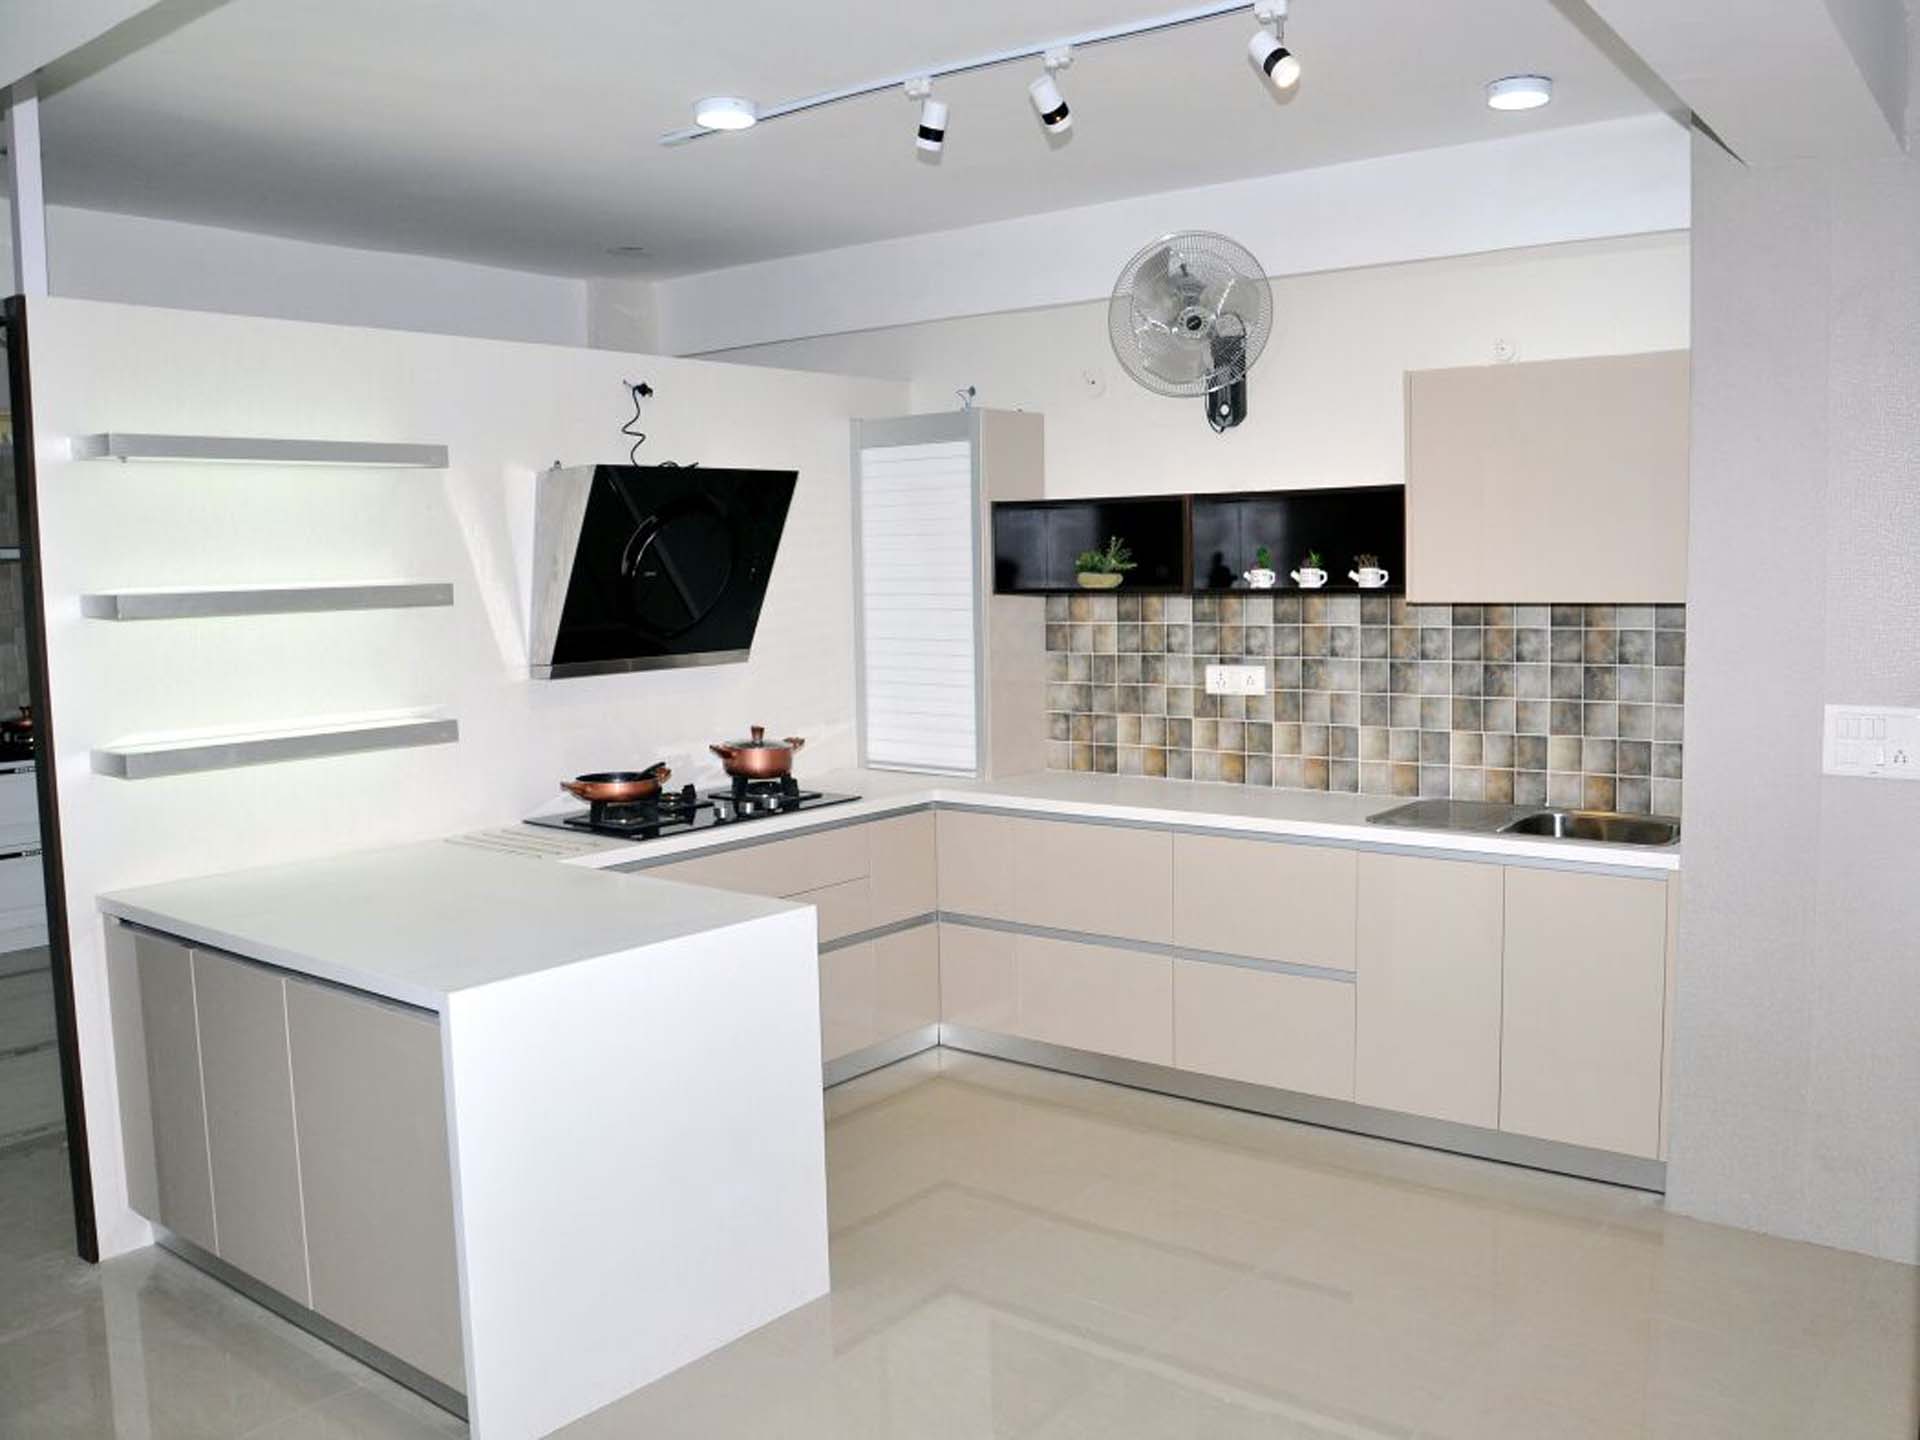 Best Material For Kitchen Modular, Best Wood For Kitchen Cabinets India